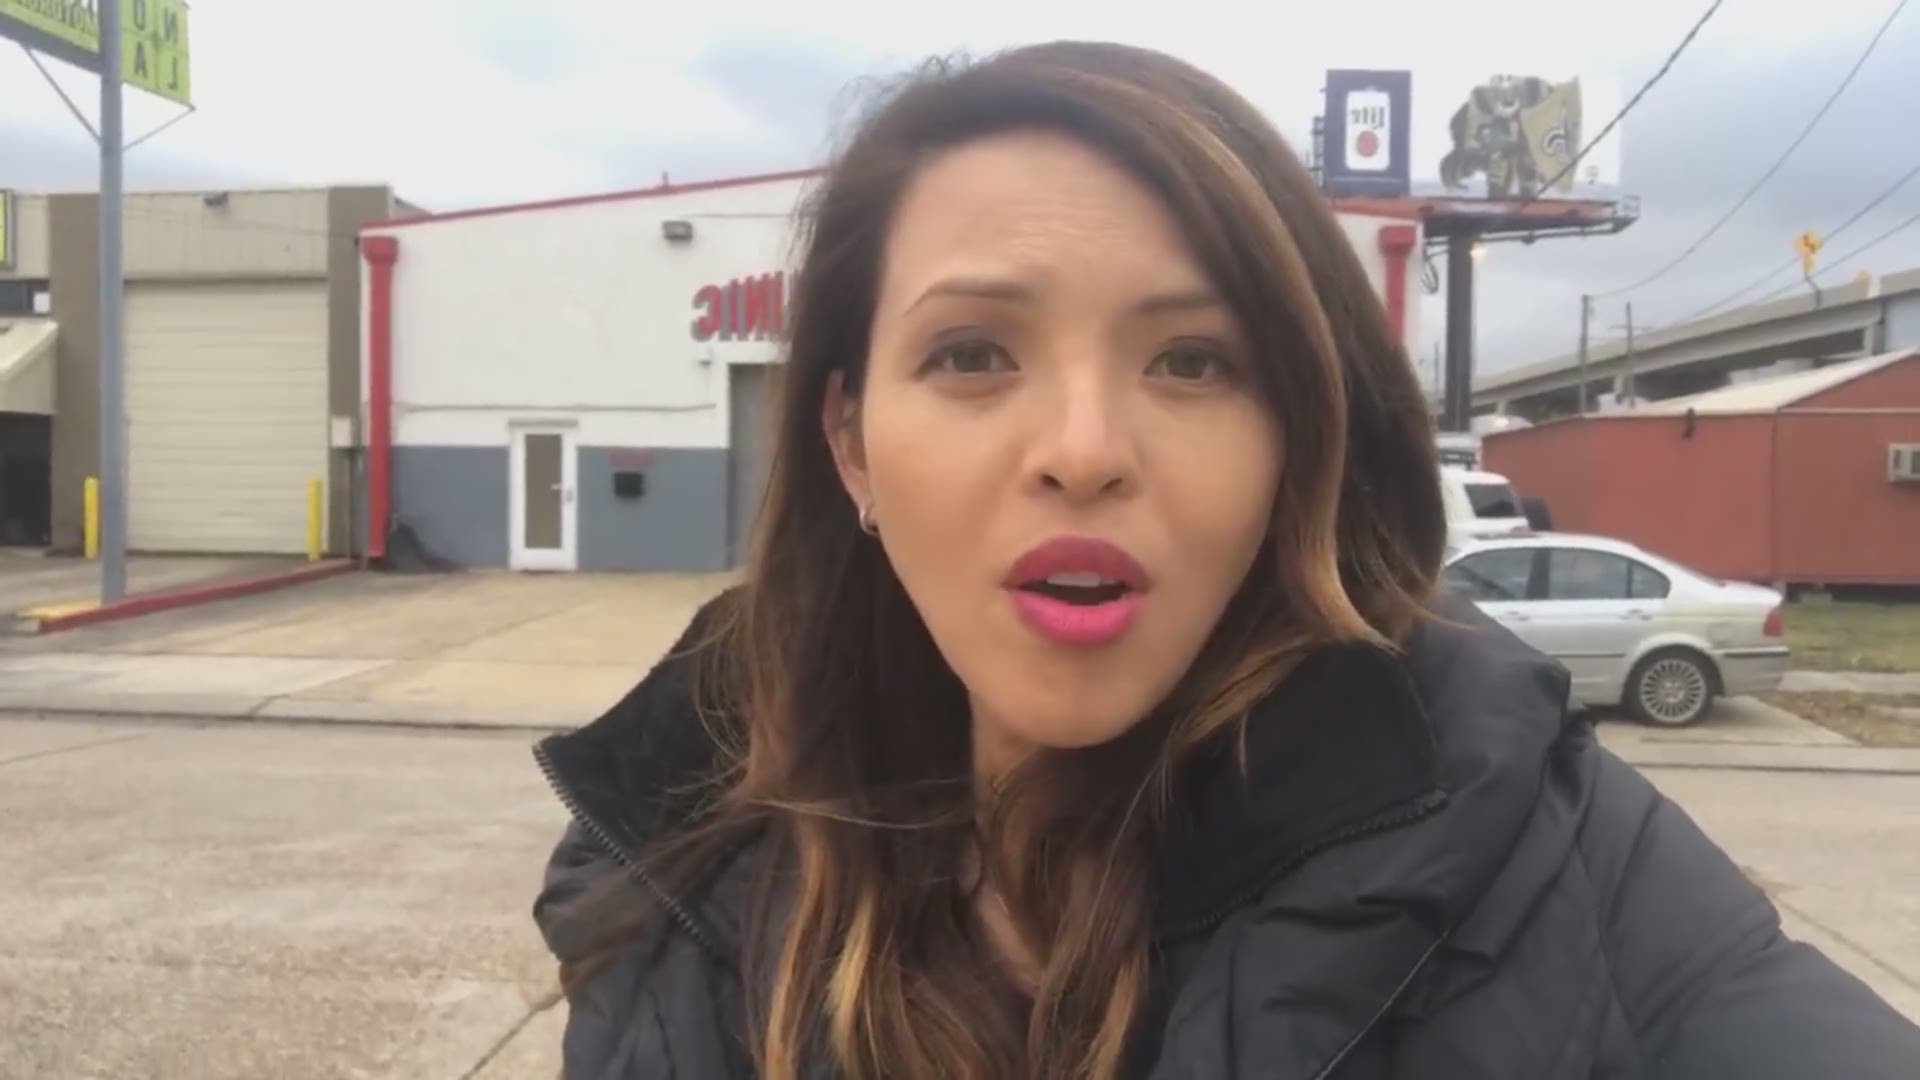 WWL-TV reporter Jacqueline Quynh shows the scene where a car fell off the side of a two-story parking garage in Jefferson Parish.